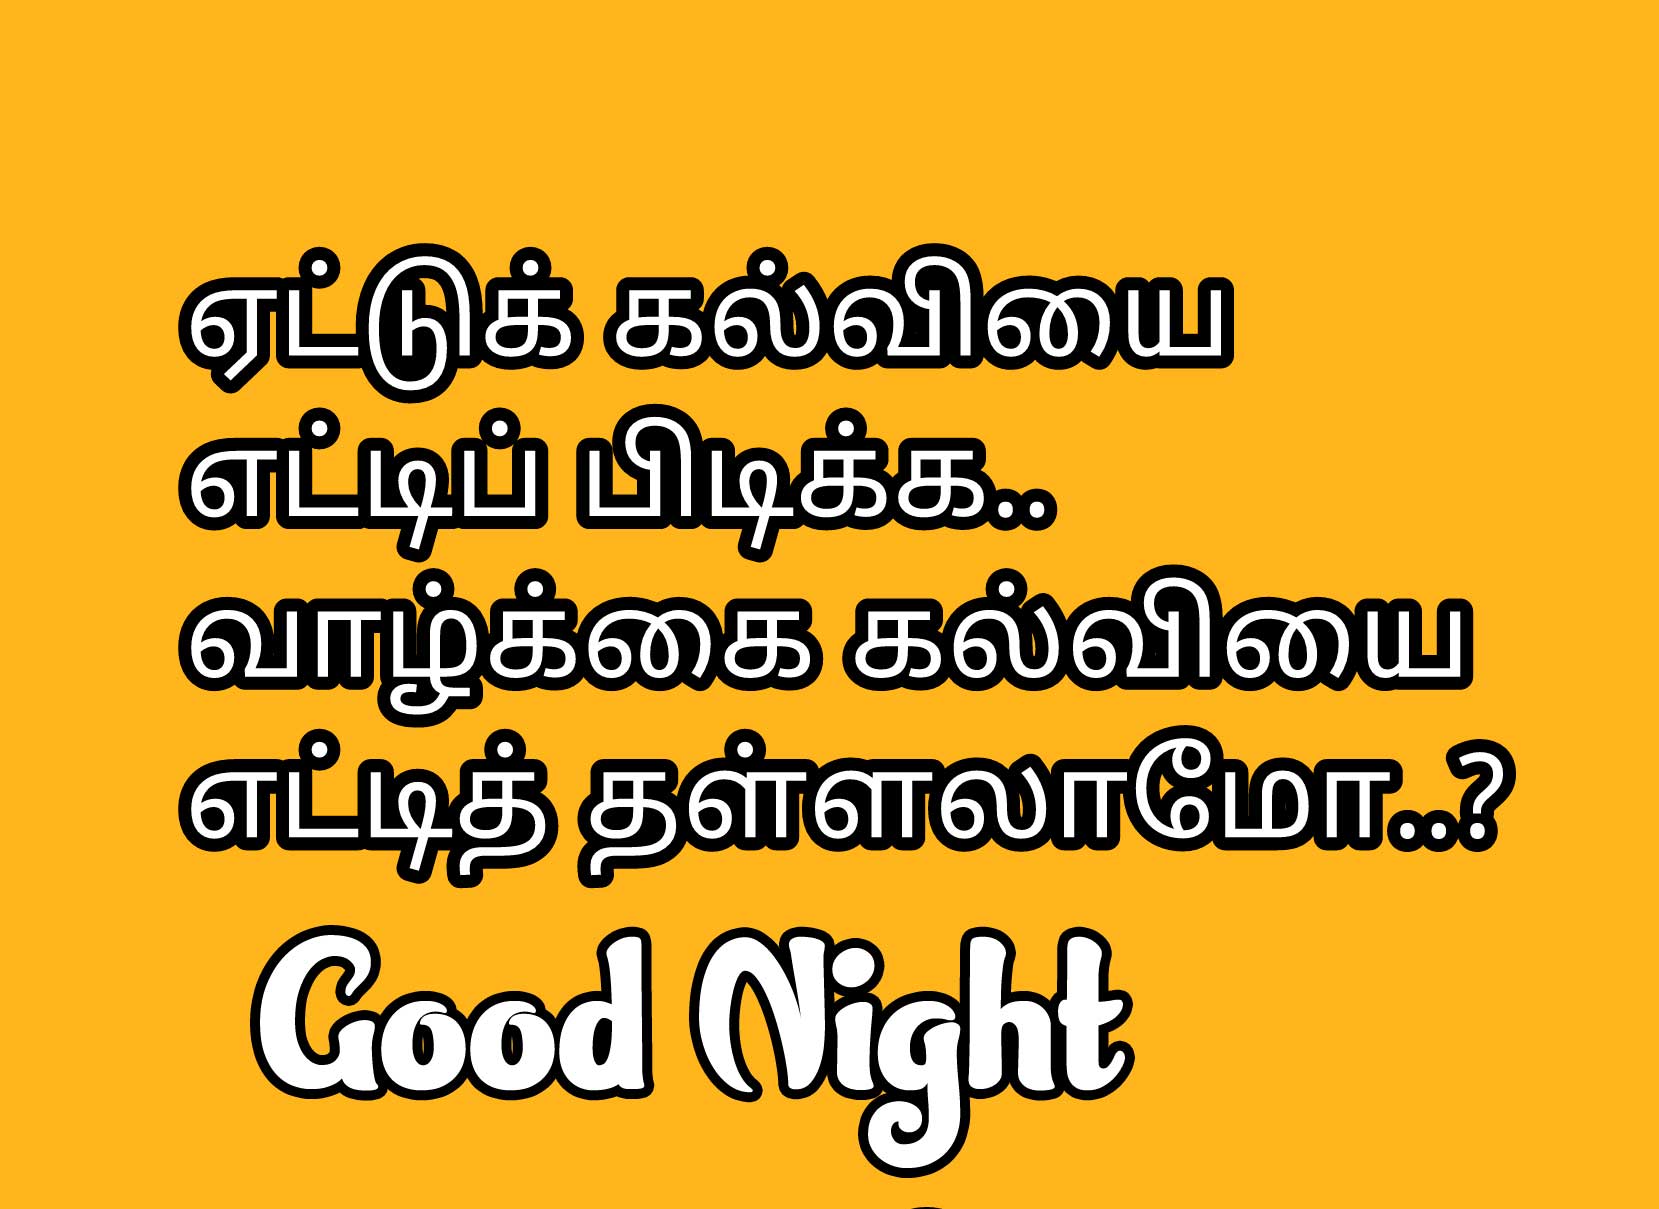  Tamil Good Night Wishes Images pics Wallpaper Free Download 